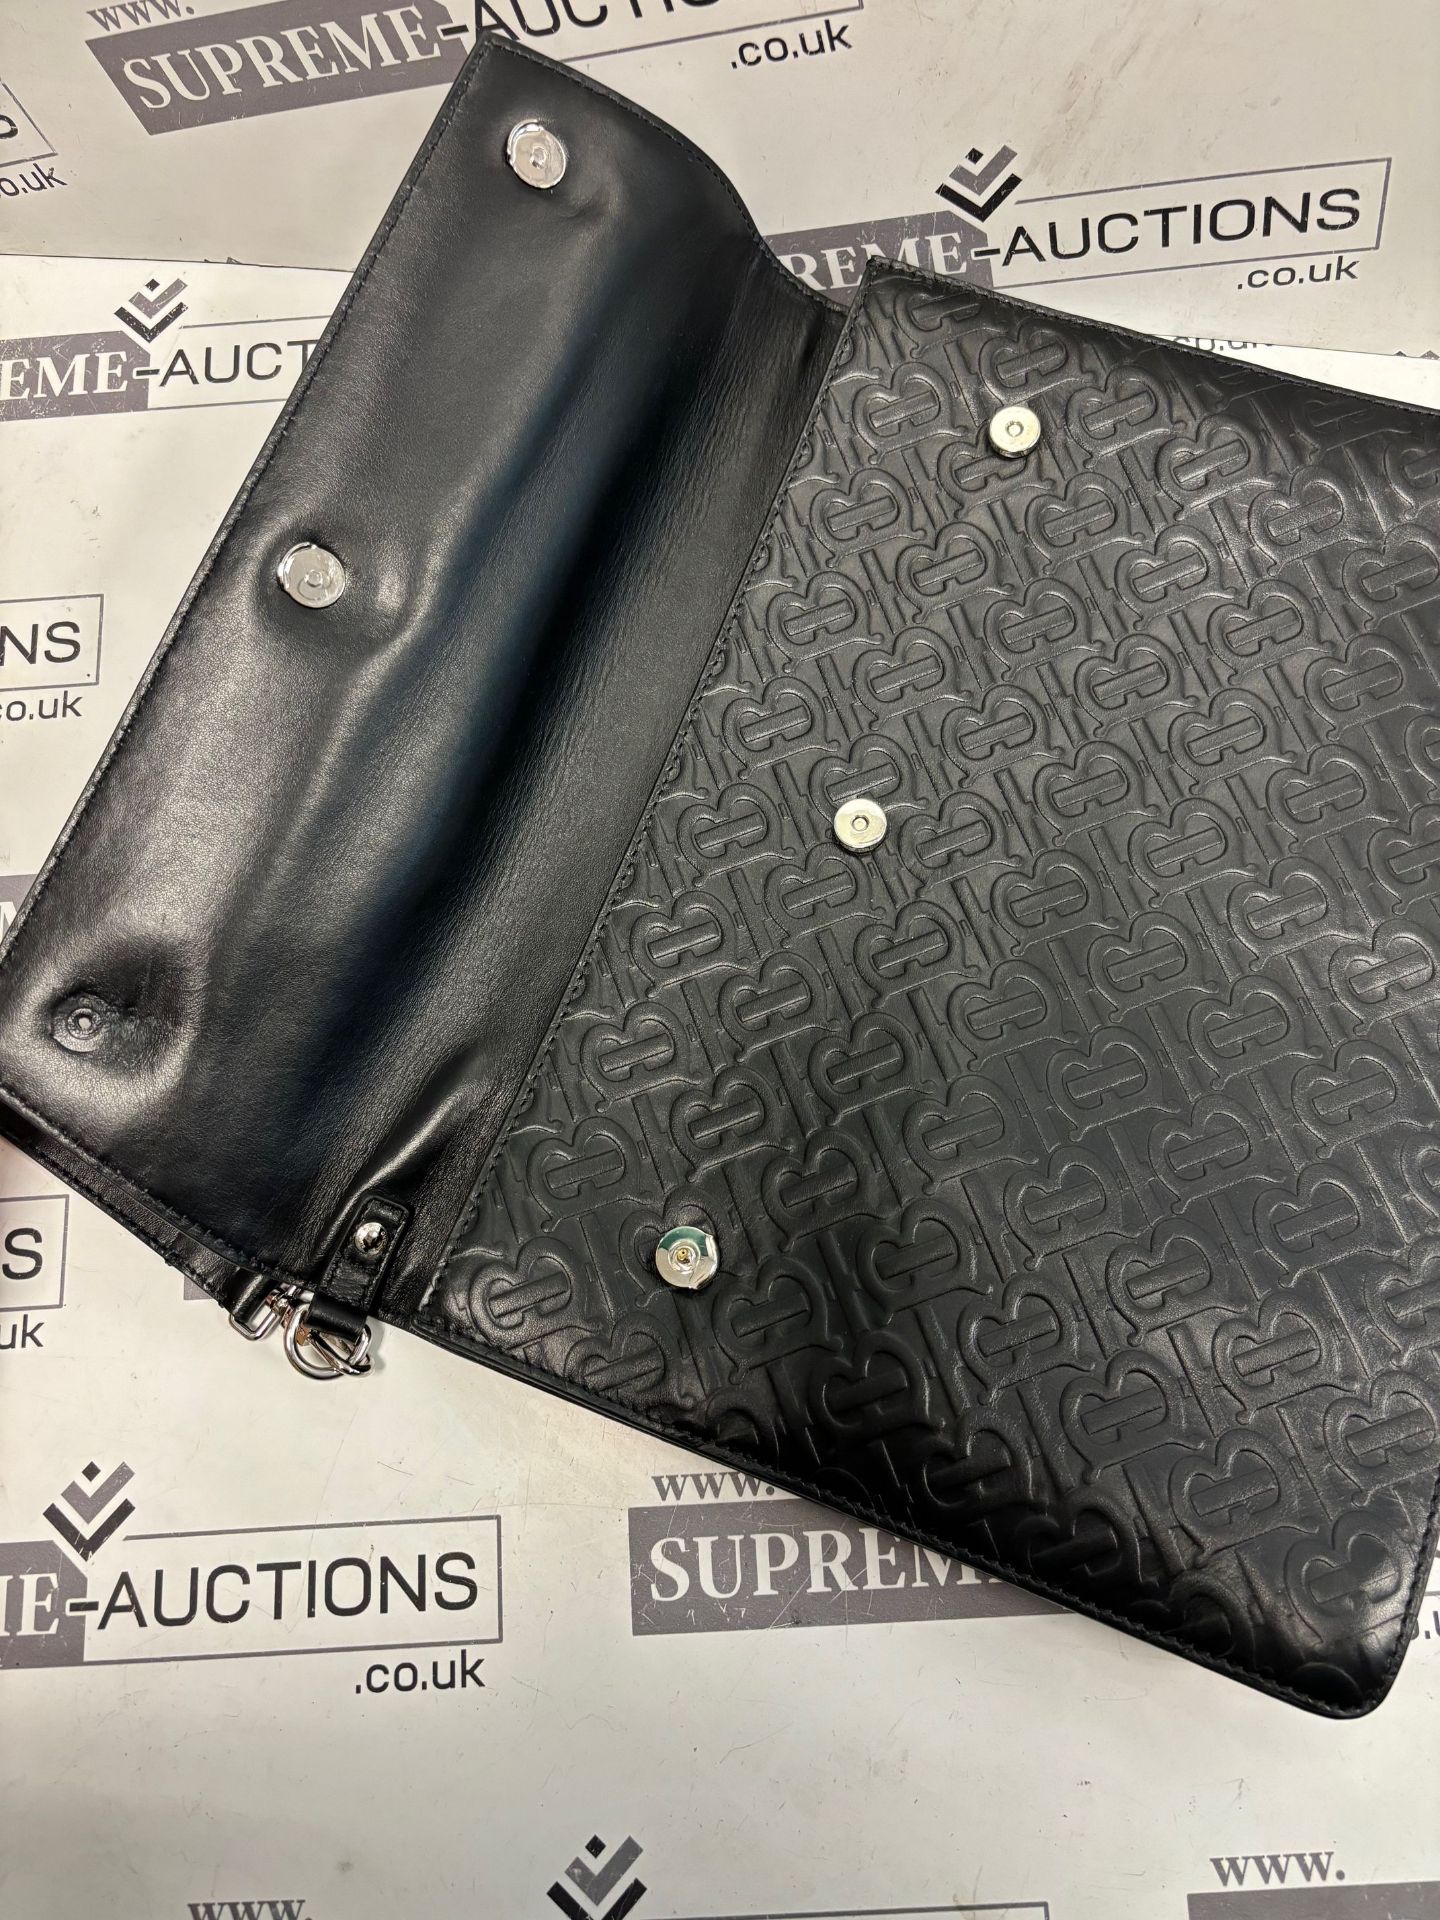 (No Vat) Burberry Envelope clutch, TB embossed leather, Black colour approx 27x35cm. - Image 4 of 7